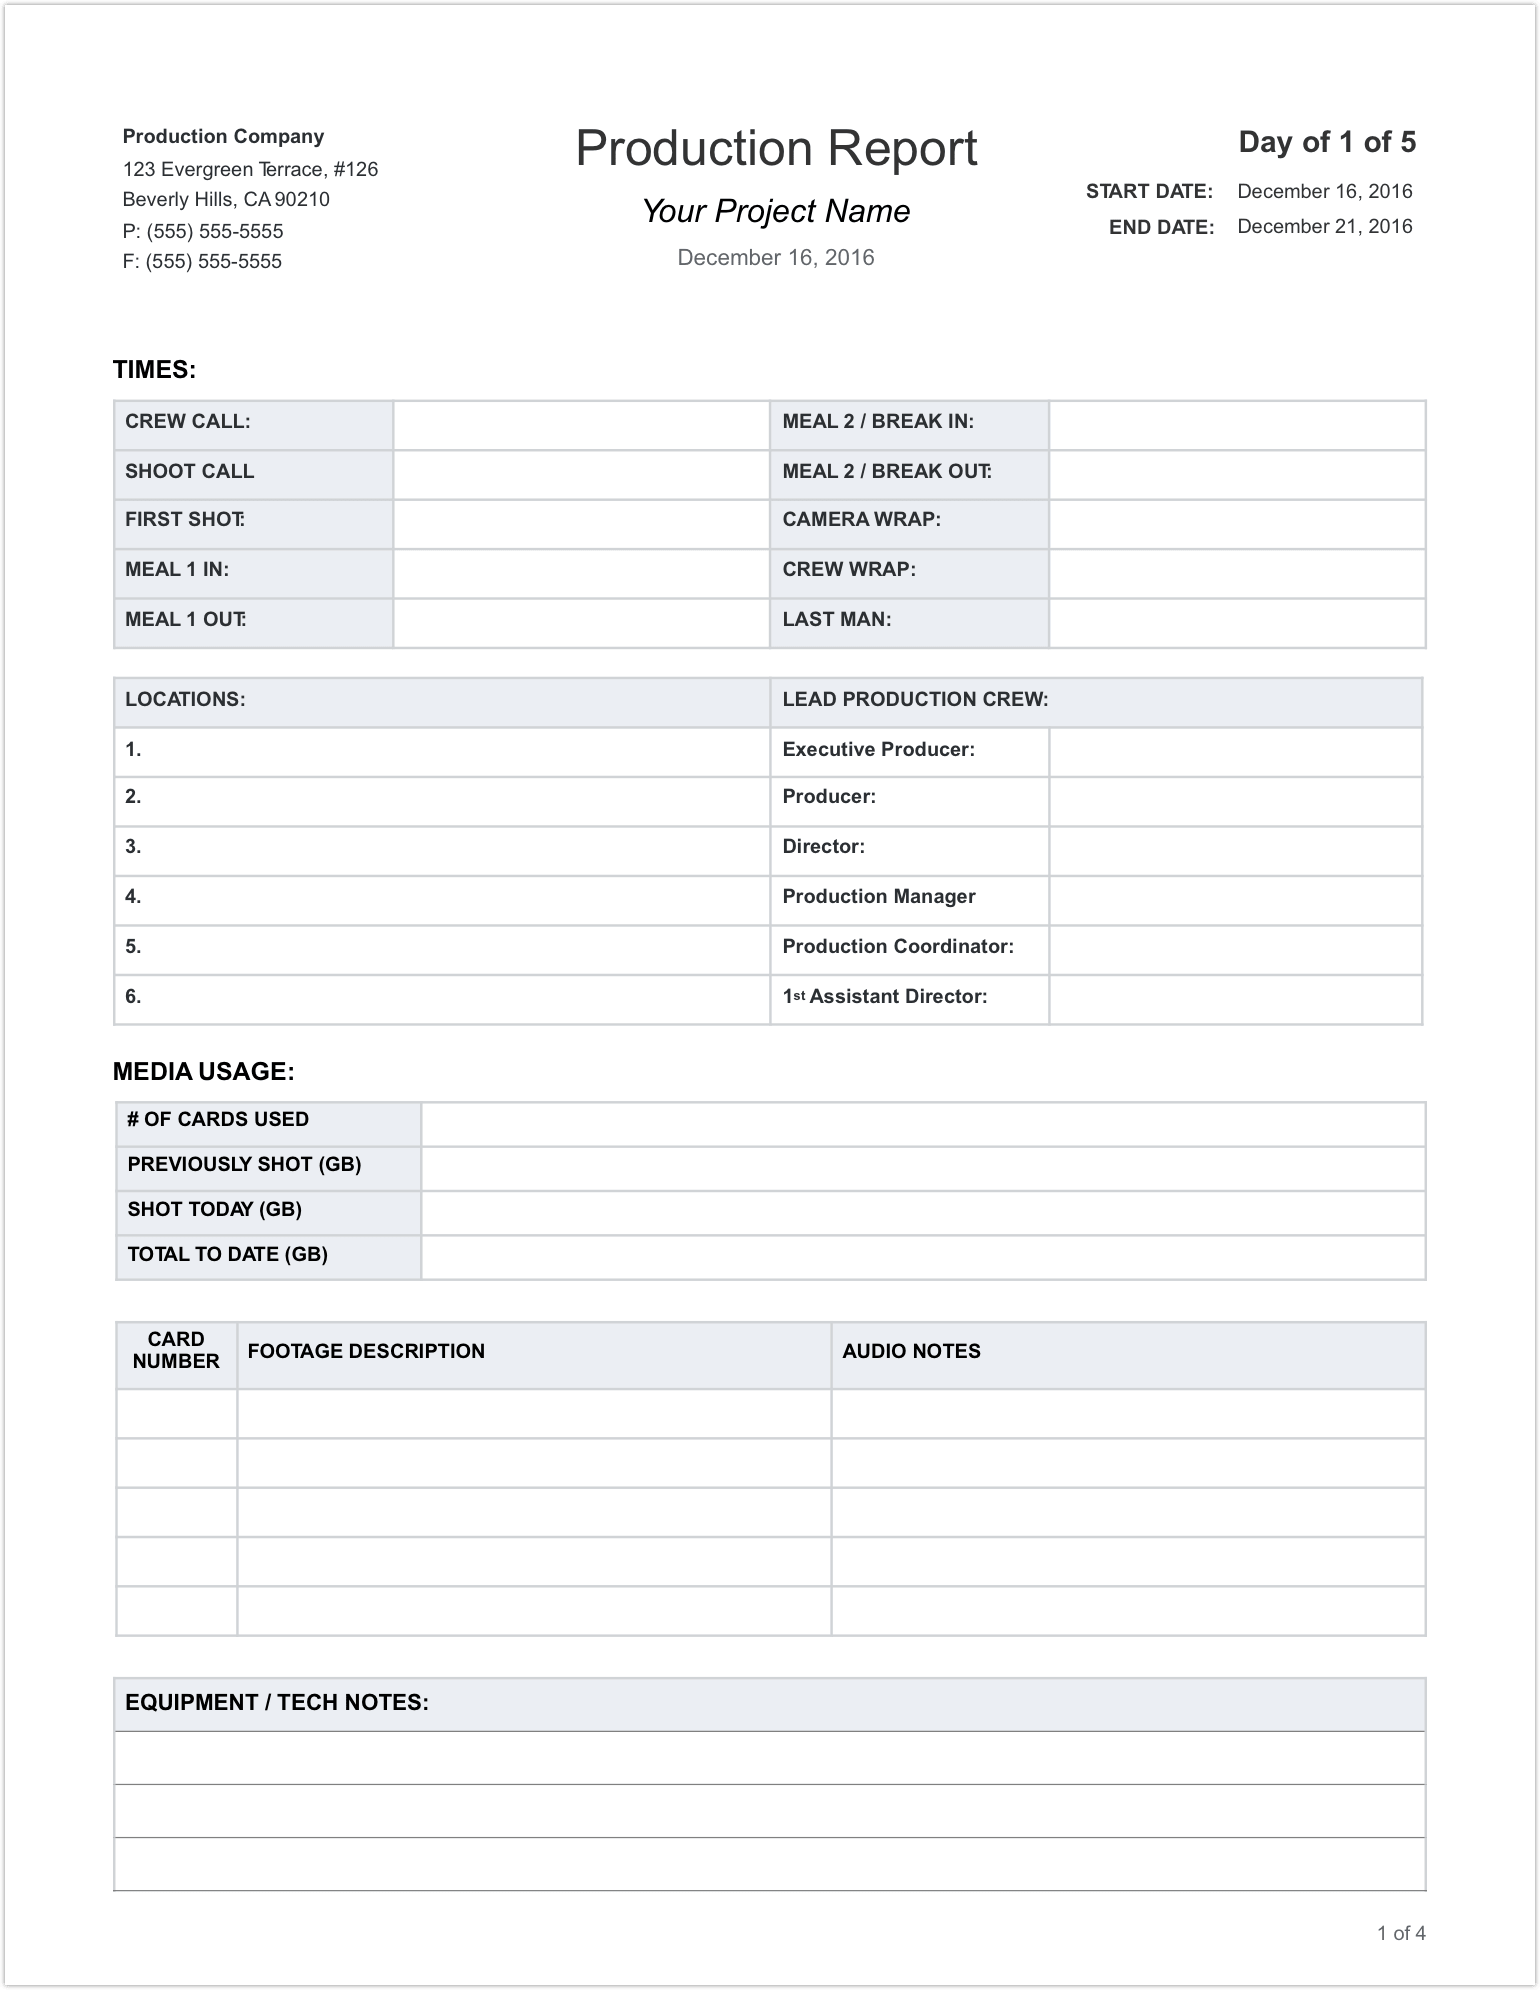 Download FREE Daily Production Report Template